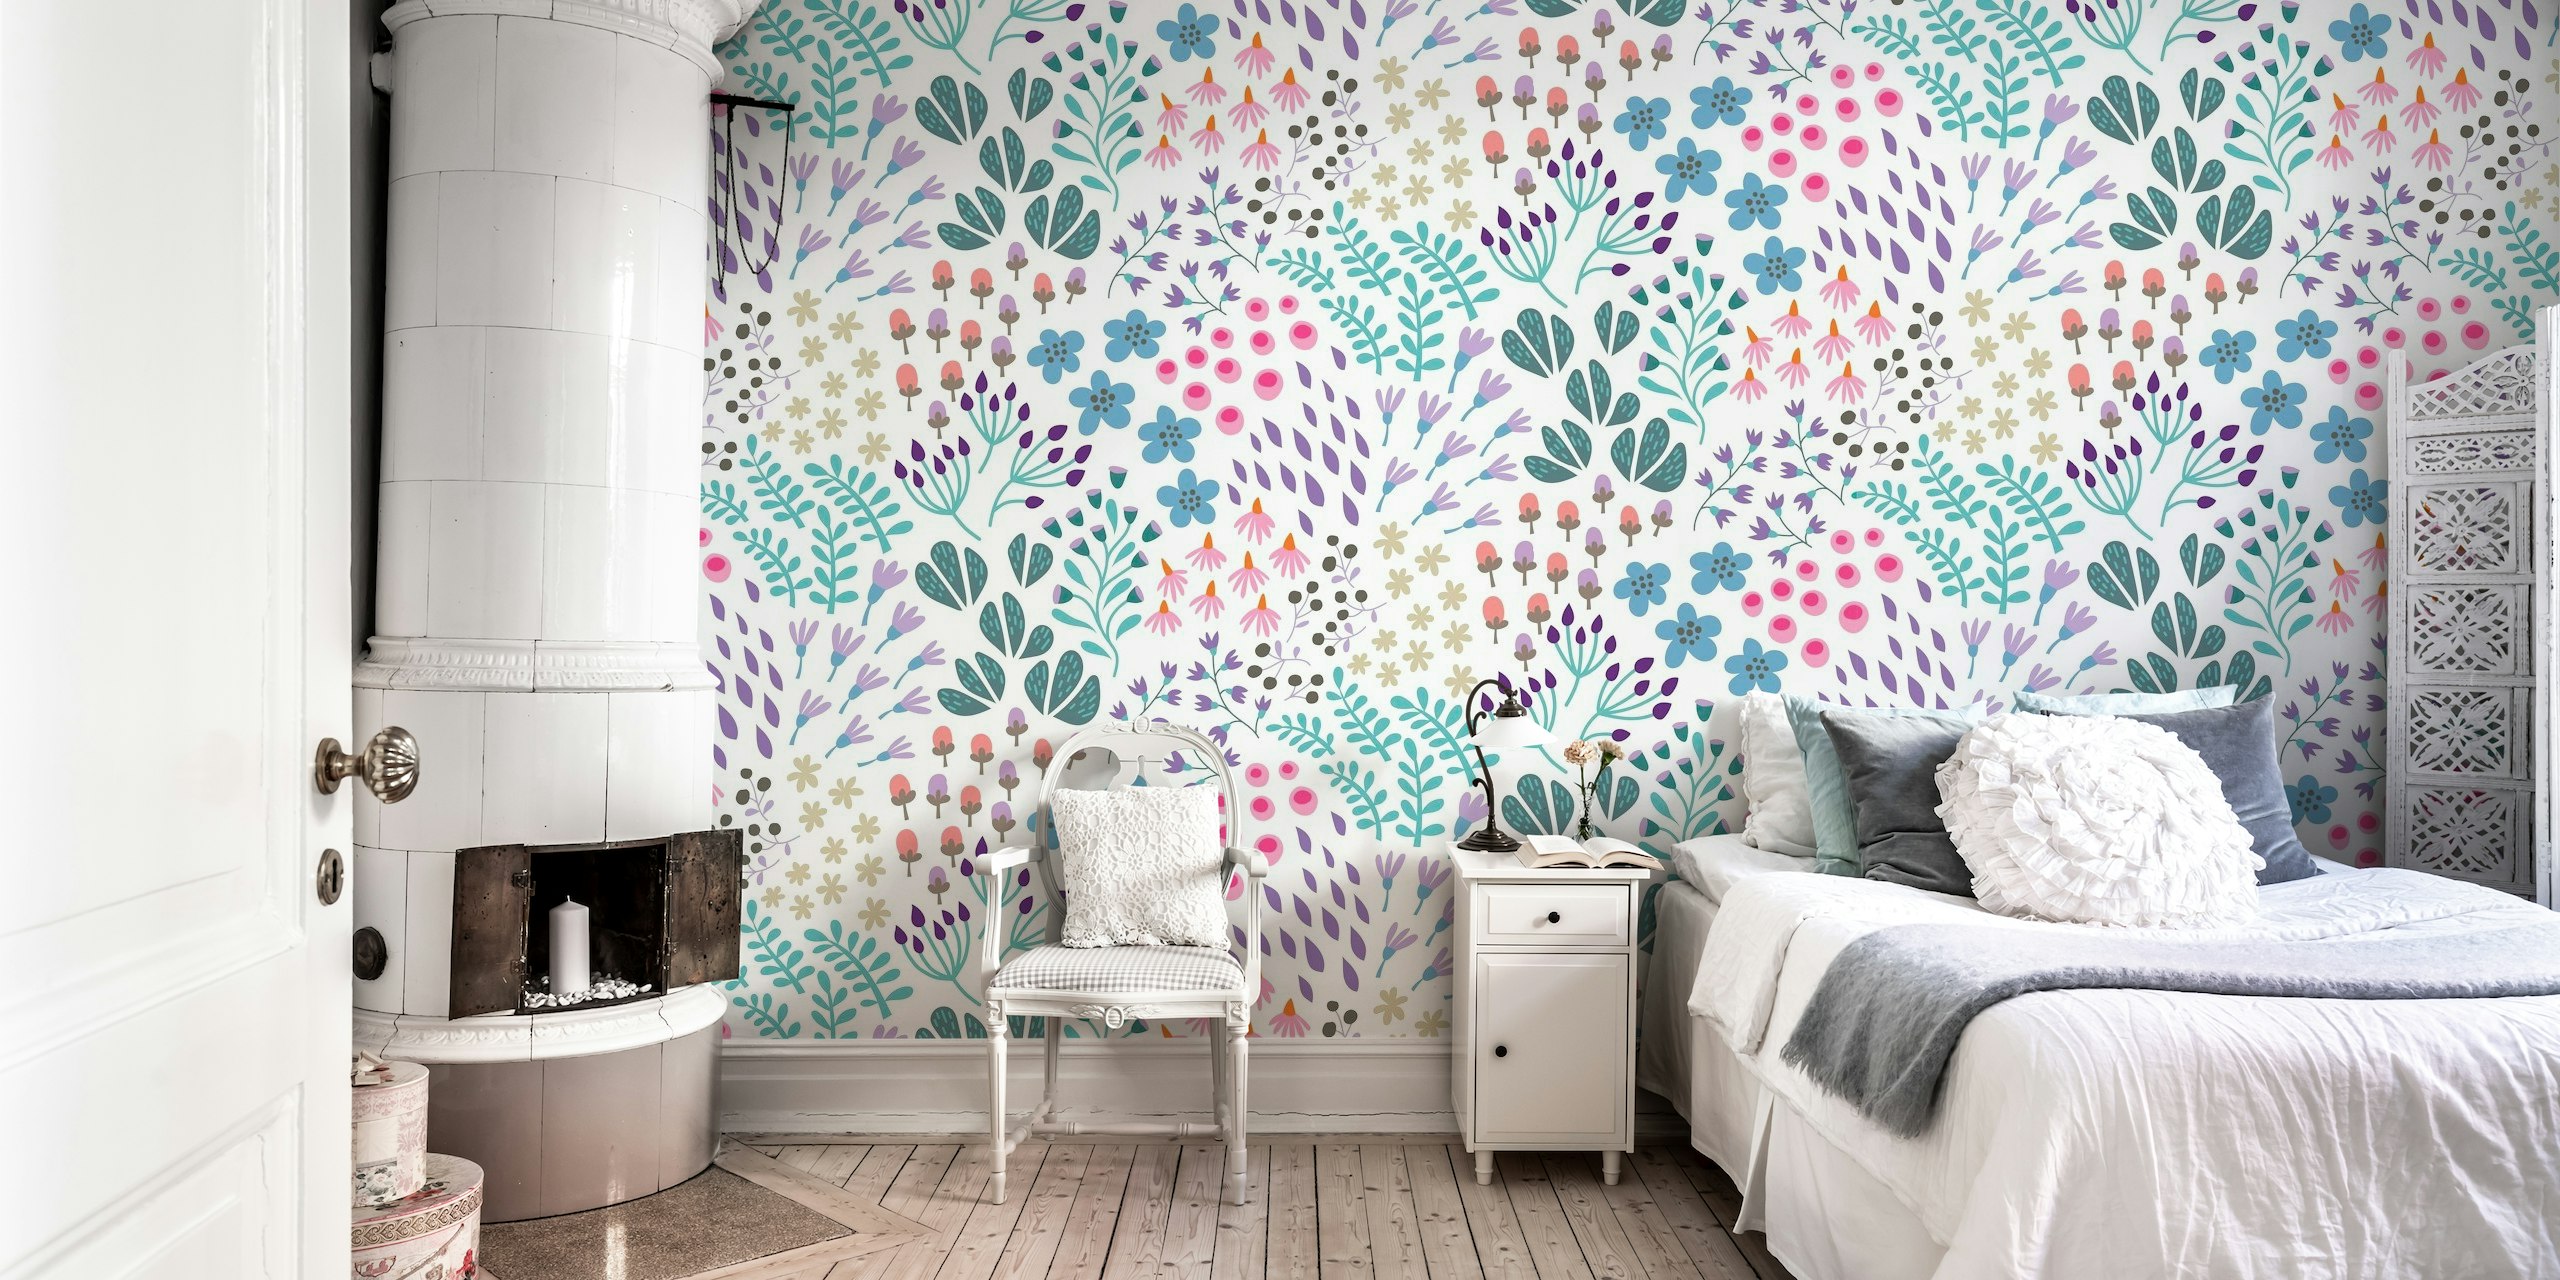 Whimsical watercolor floral wall mural with soft pinks and tranquil blues